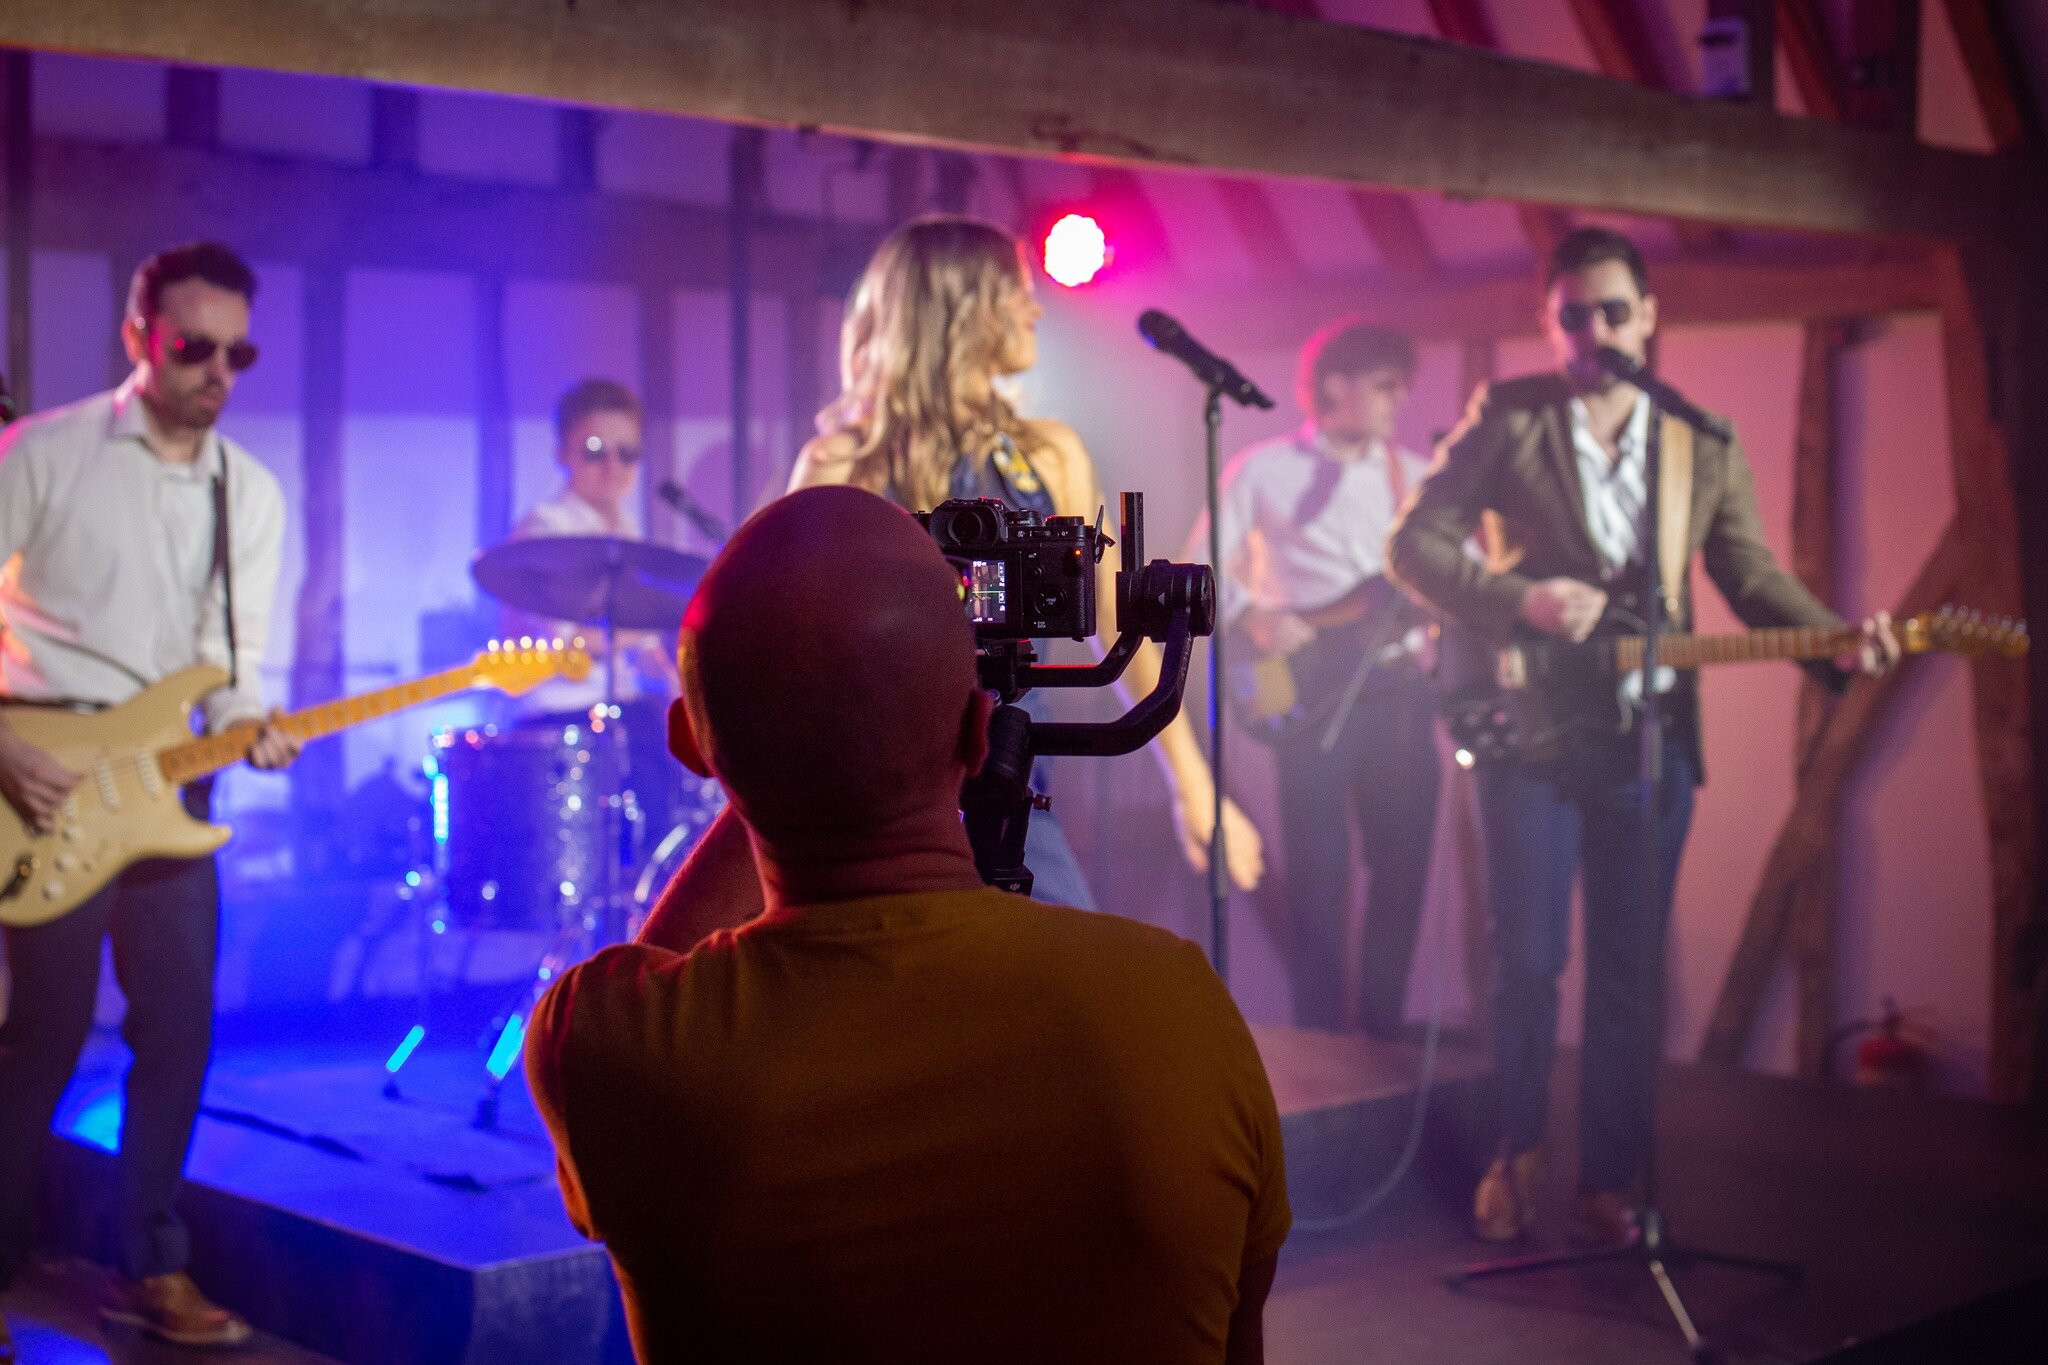 A special shoutout to @toast32filmco, @davidbirniemusic and the gorgeous @southfarm1 for making our shoot day happen, and for putting in some serious hours behind the scenes in order to make it look and sound so damn pretty! 🎥

If you haven't watche